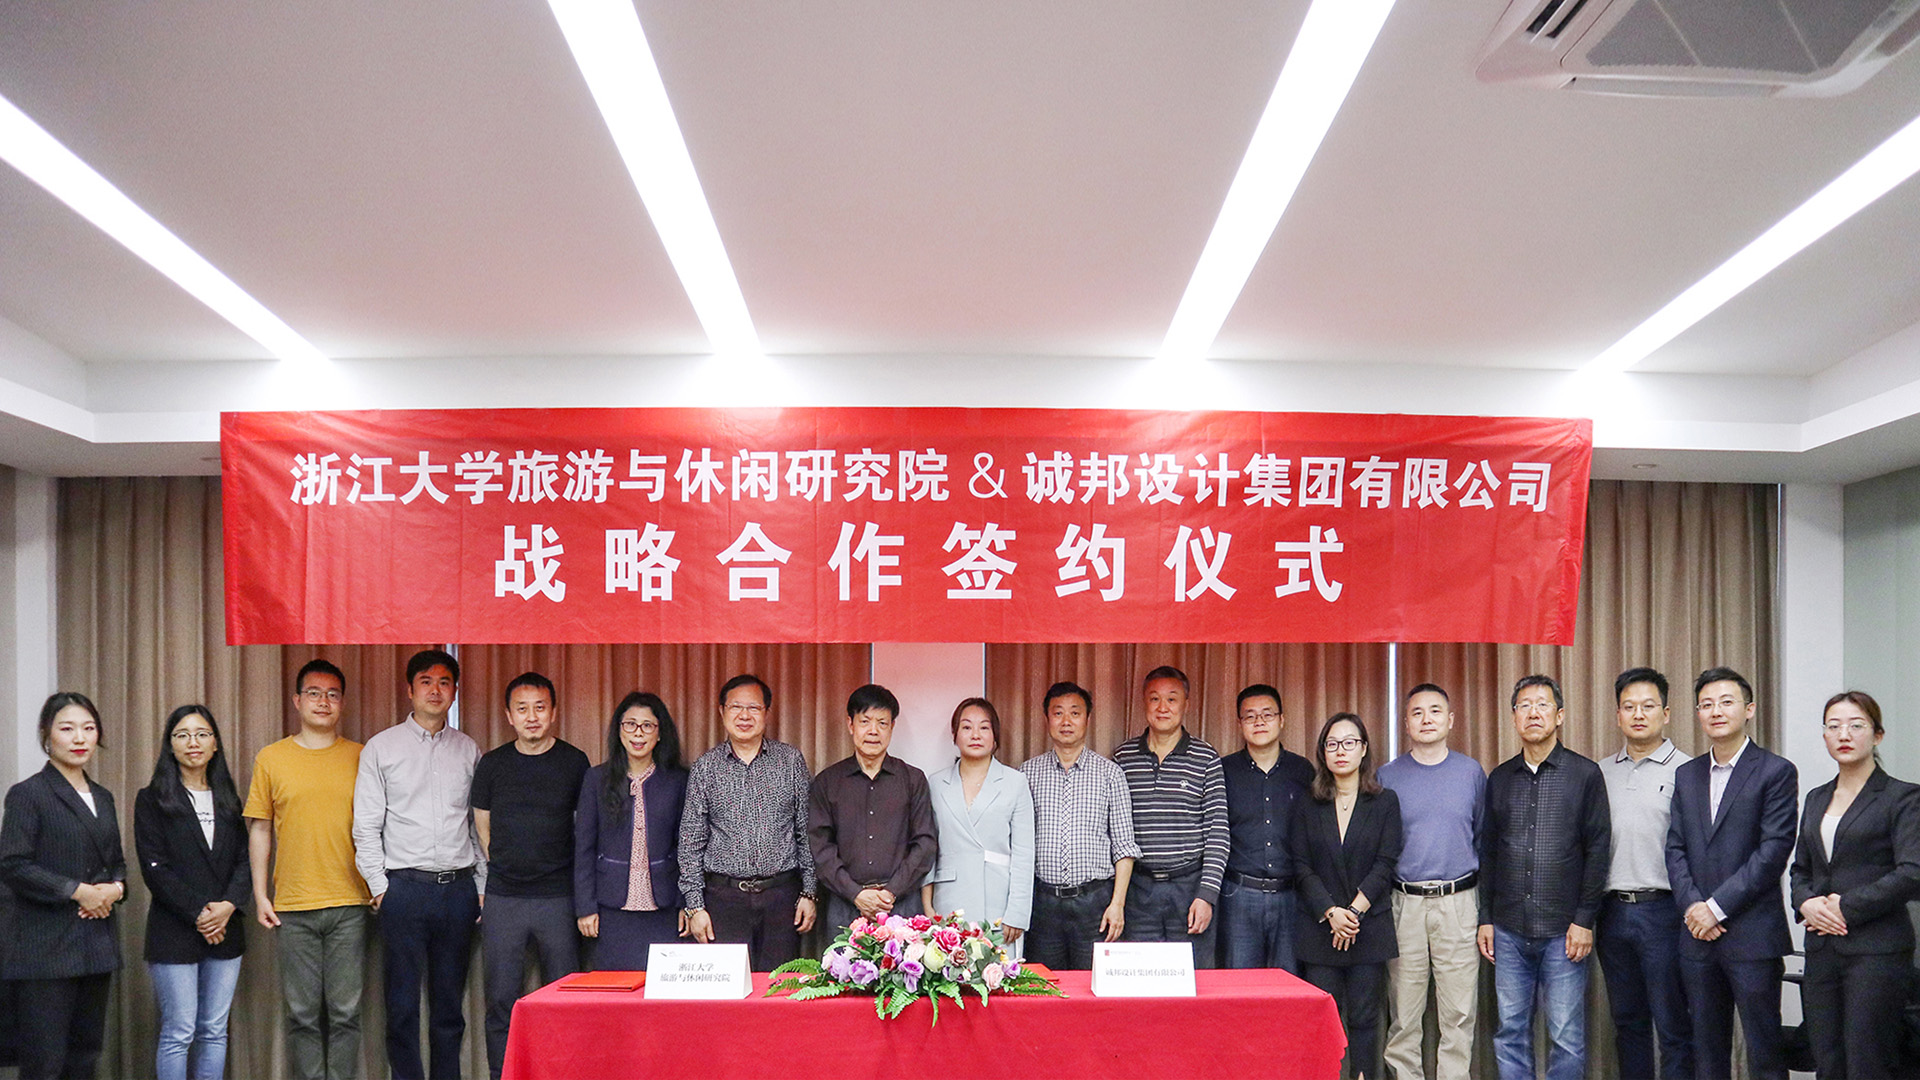 Chengbang Design Group & Zhejiang University Tourism and Leisure Research Institute announced a strategic cooperation